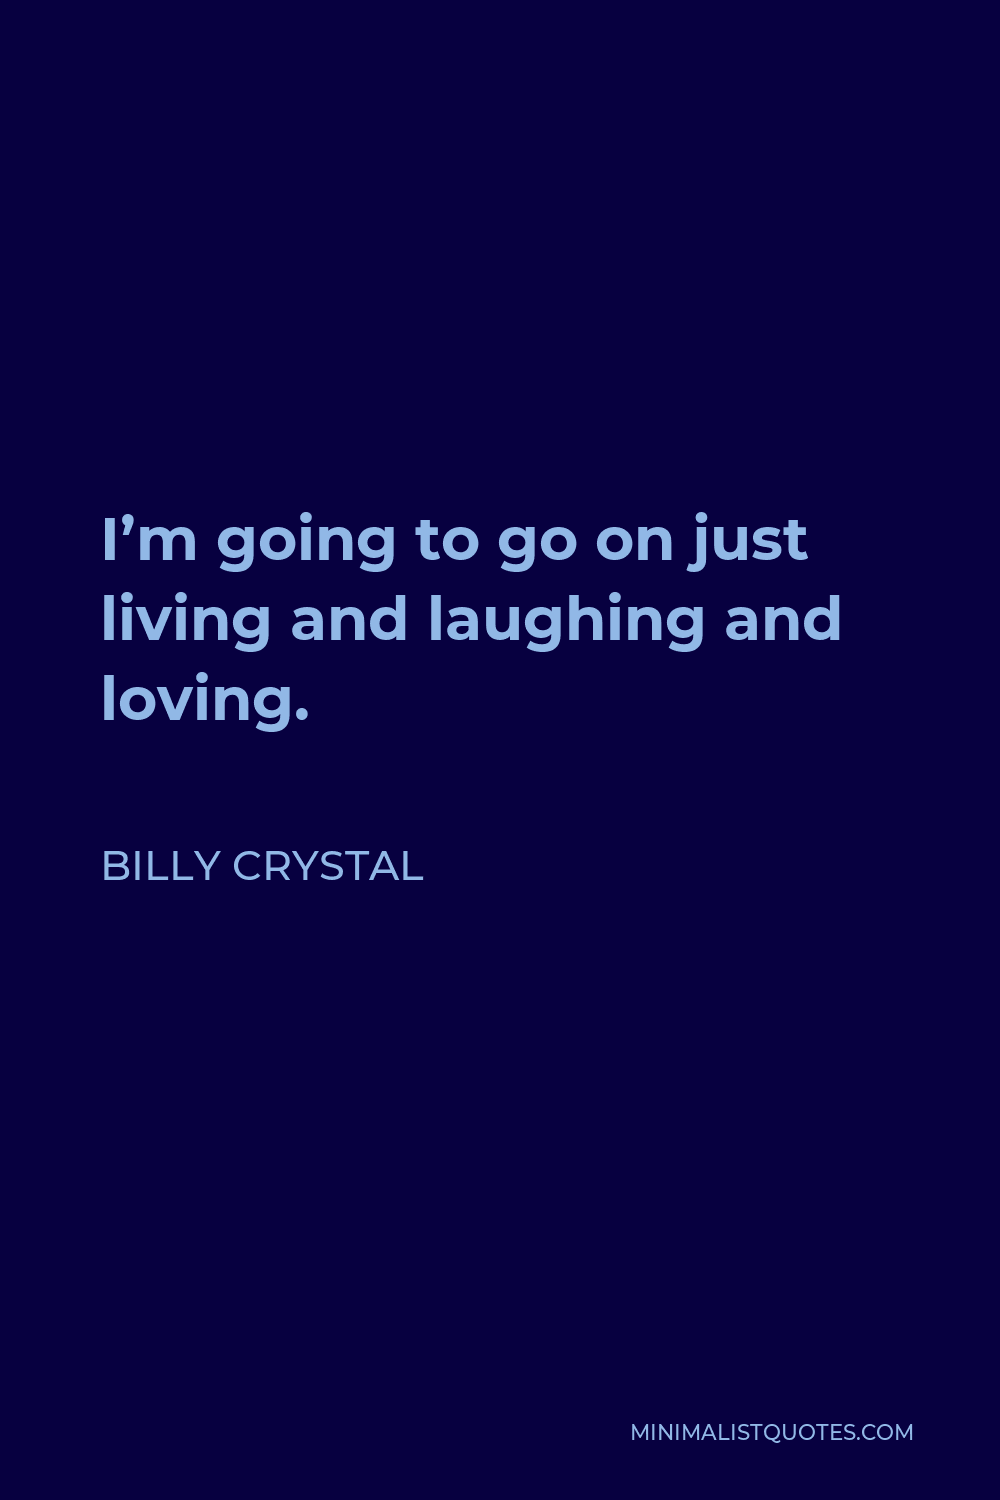 Billy Crystal Quote - I’m going to go on just living and laughing and loving.